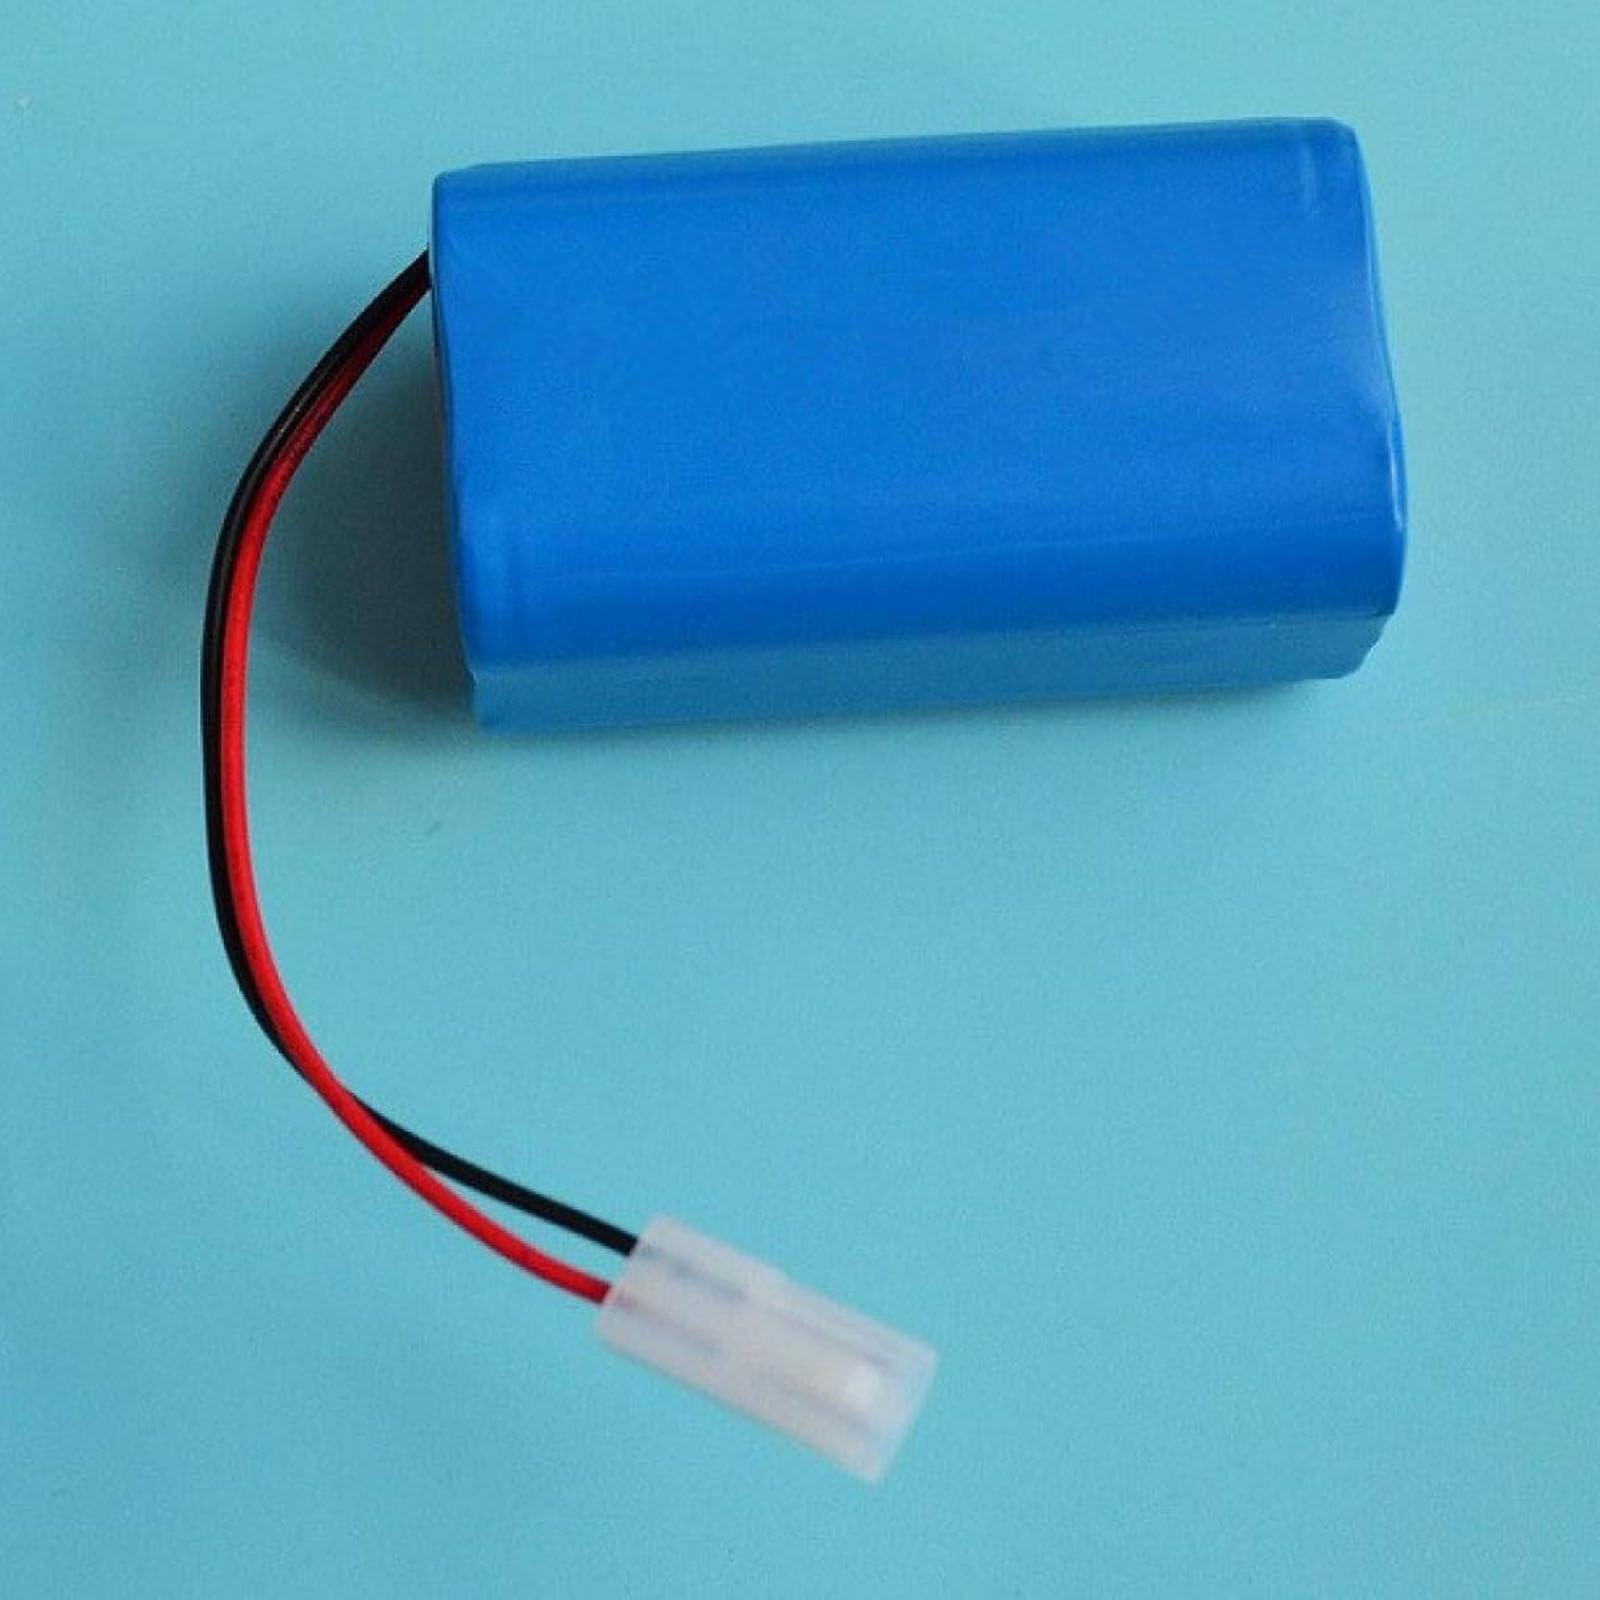 CSTAL 7.4V 4.4Ah 2S2P Lithium Ion Battery Pack, Comes with PCB Wires and SM-2P Connector